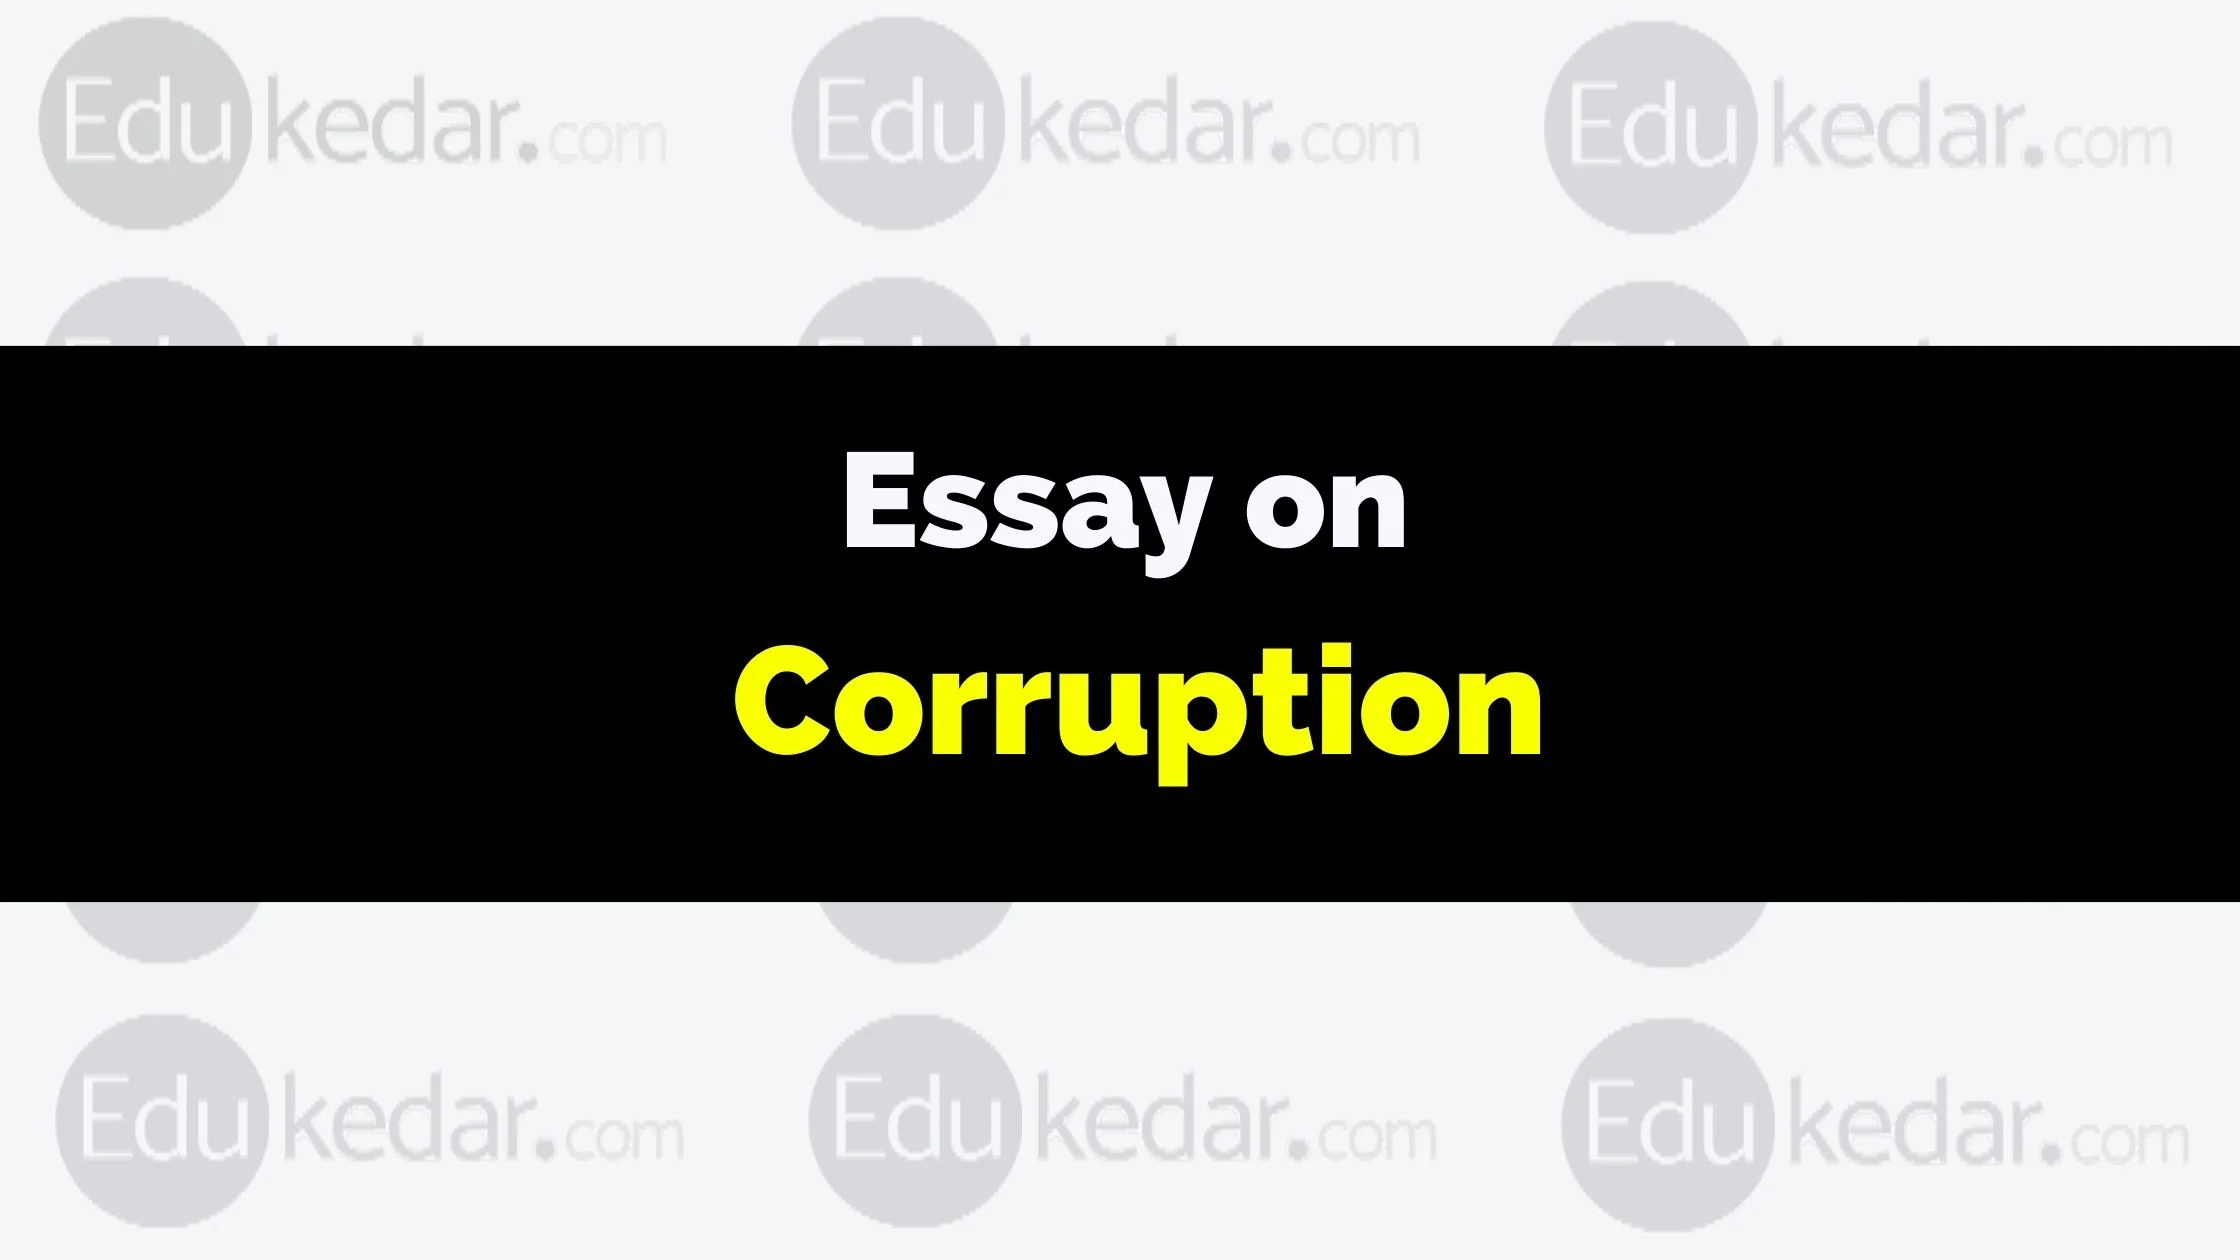 essay on corruption in 150 words